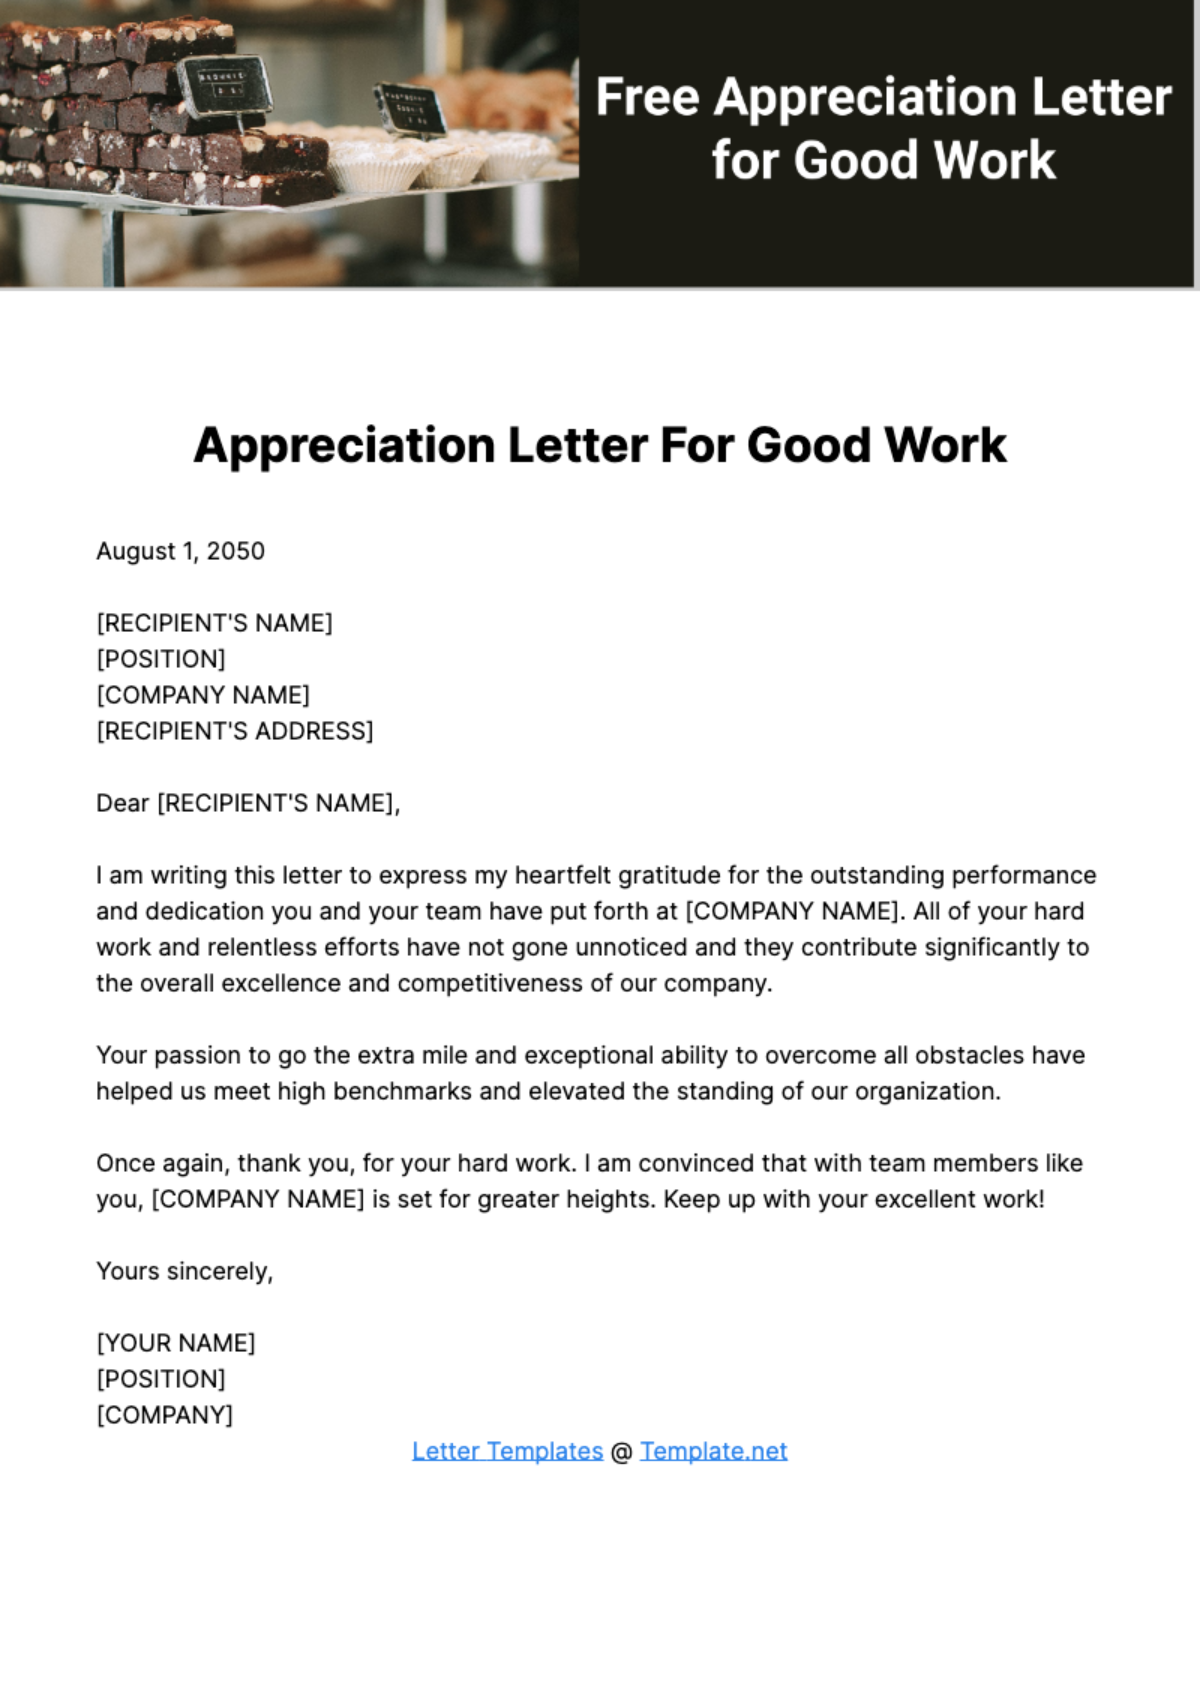 Free Appreciation Letter for Good Work Template